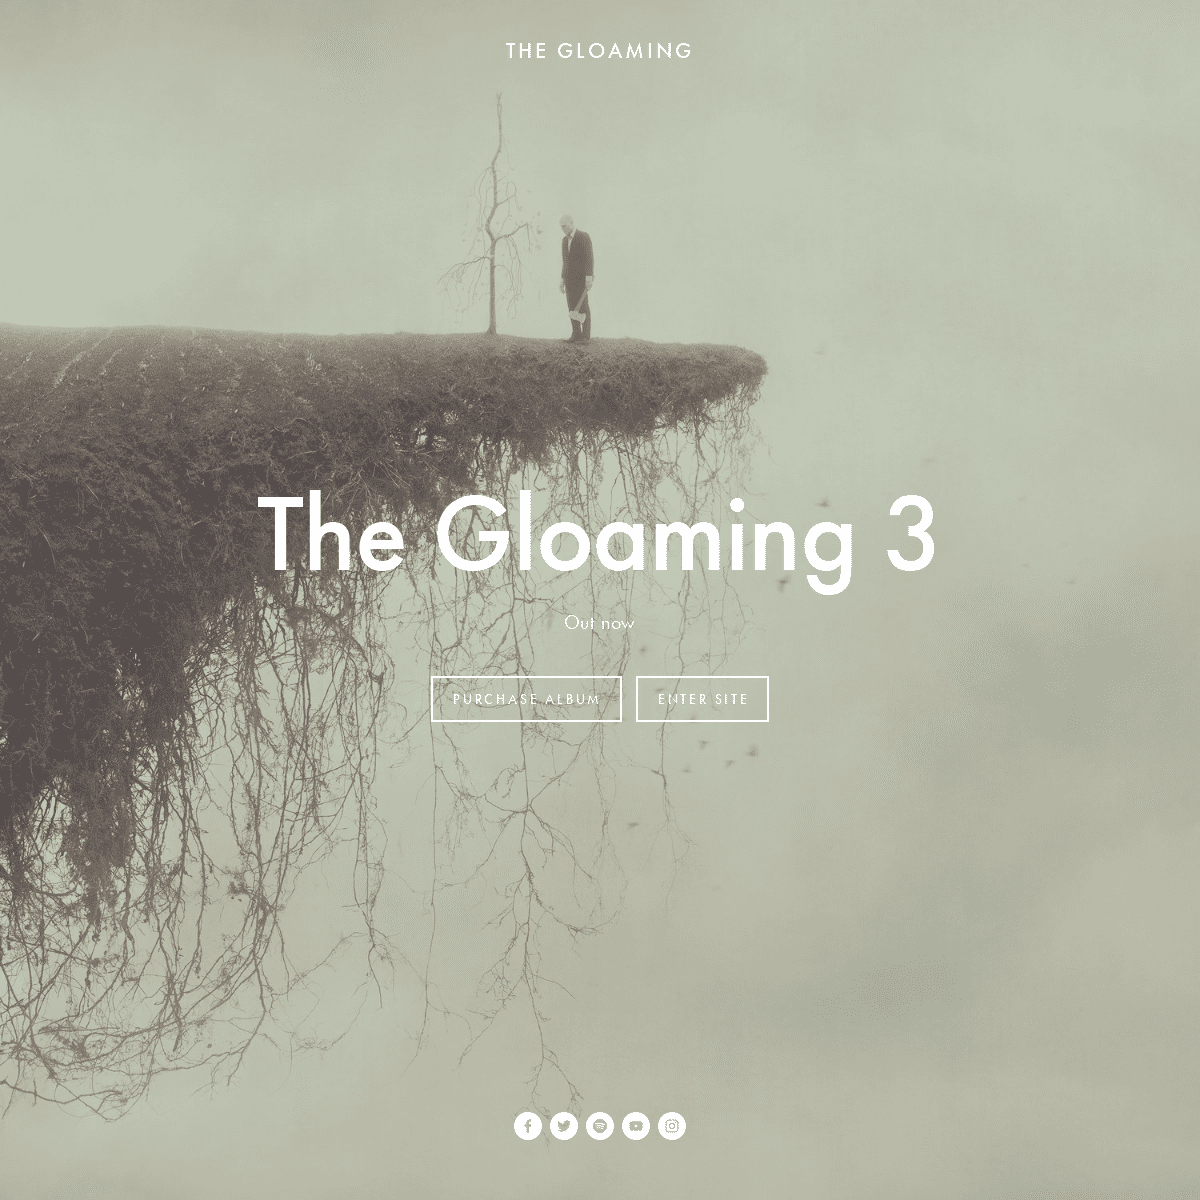 A complete backup of thegloaming.net